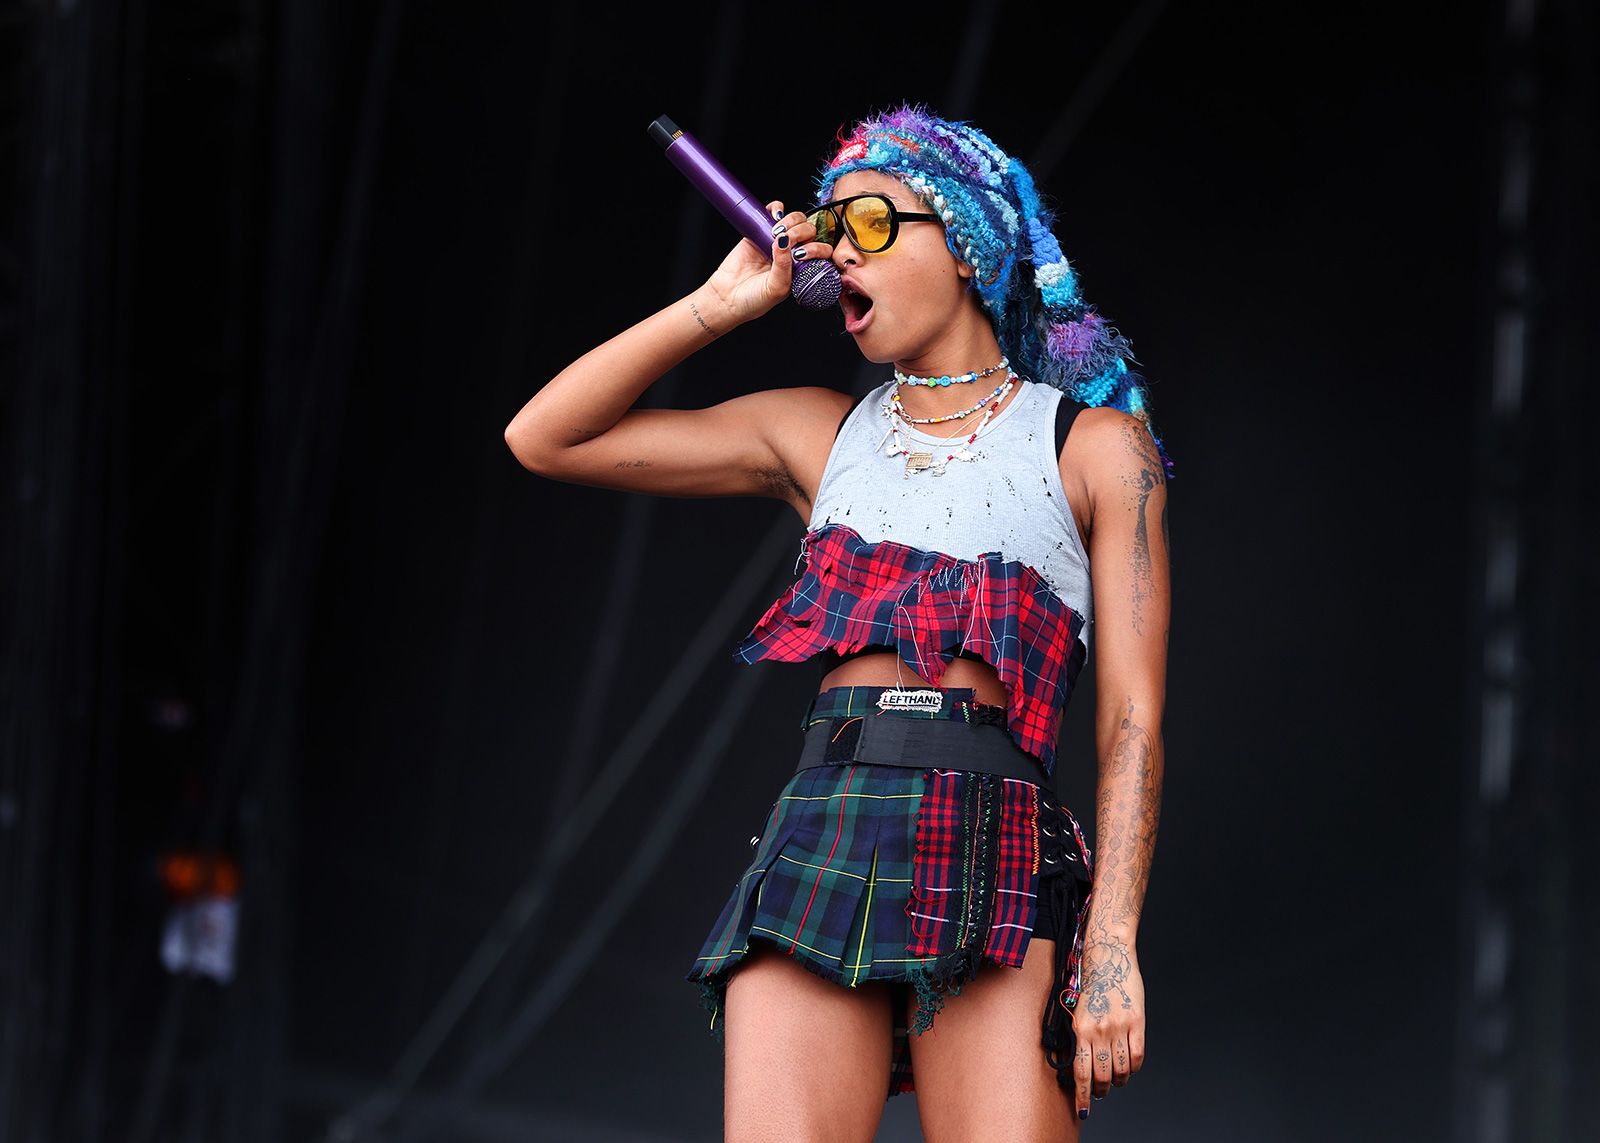 READING, ENGLAND - AUGUST 28: (EDITORIAL USE ONLY) Willow performs live on stage at Reading Festival day three on August 28, 2022 in Reading, England. (Photo by Simone Joyner/Getty Images)